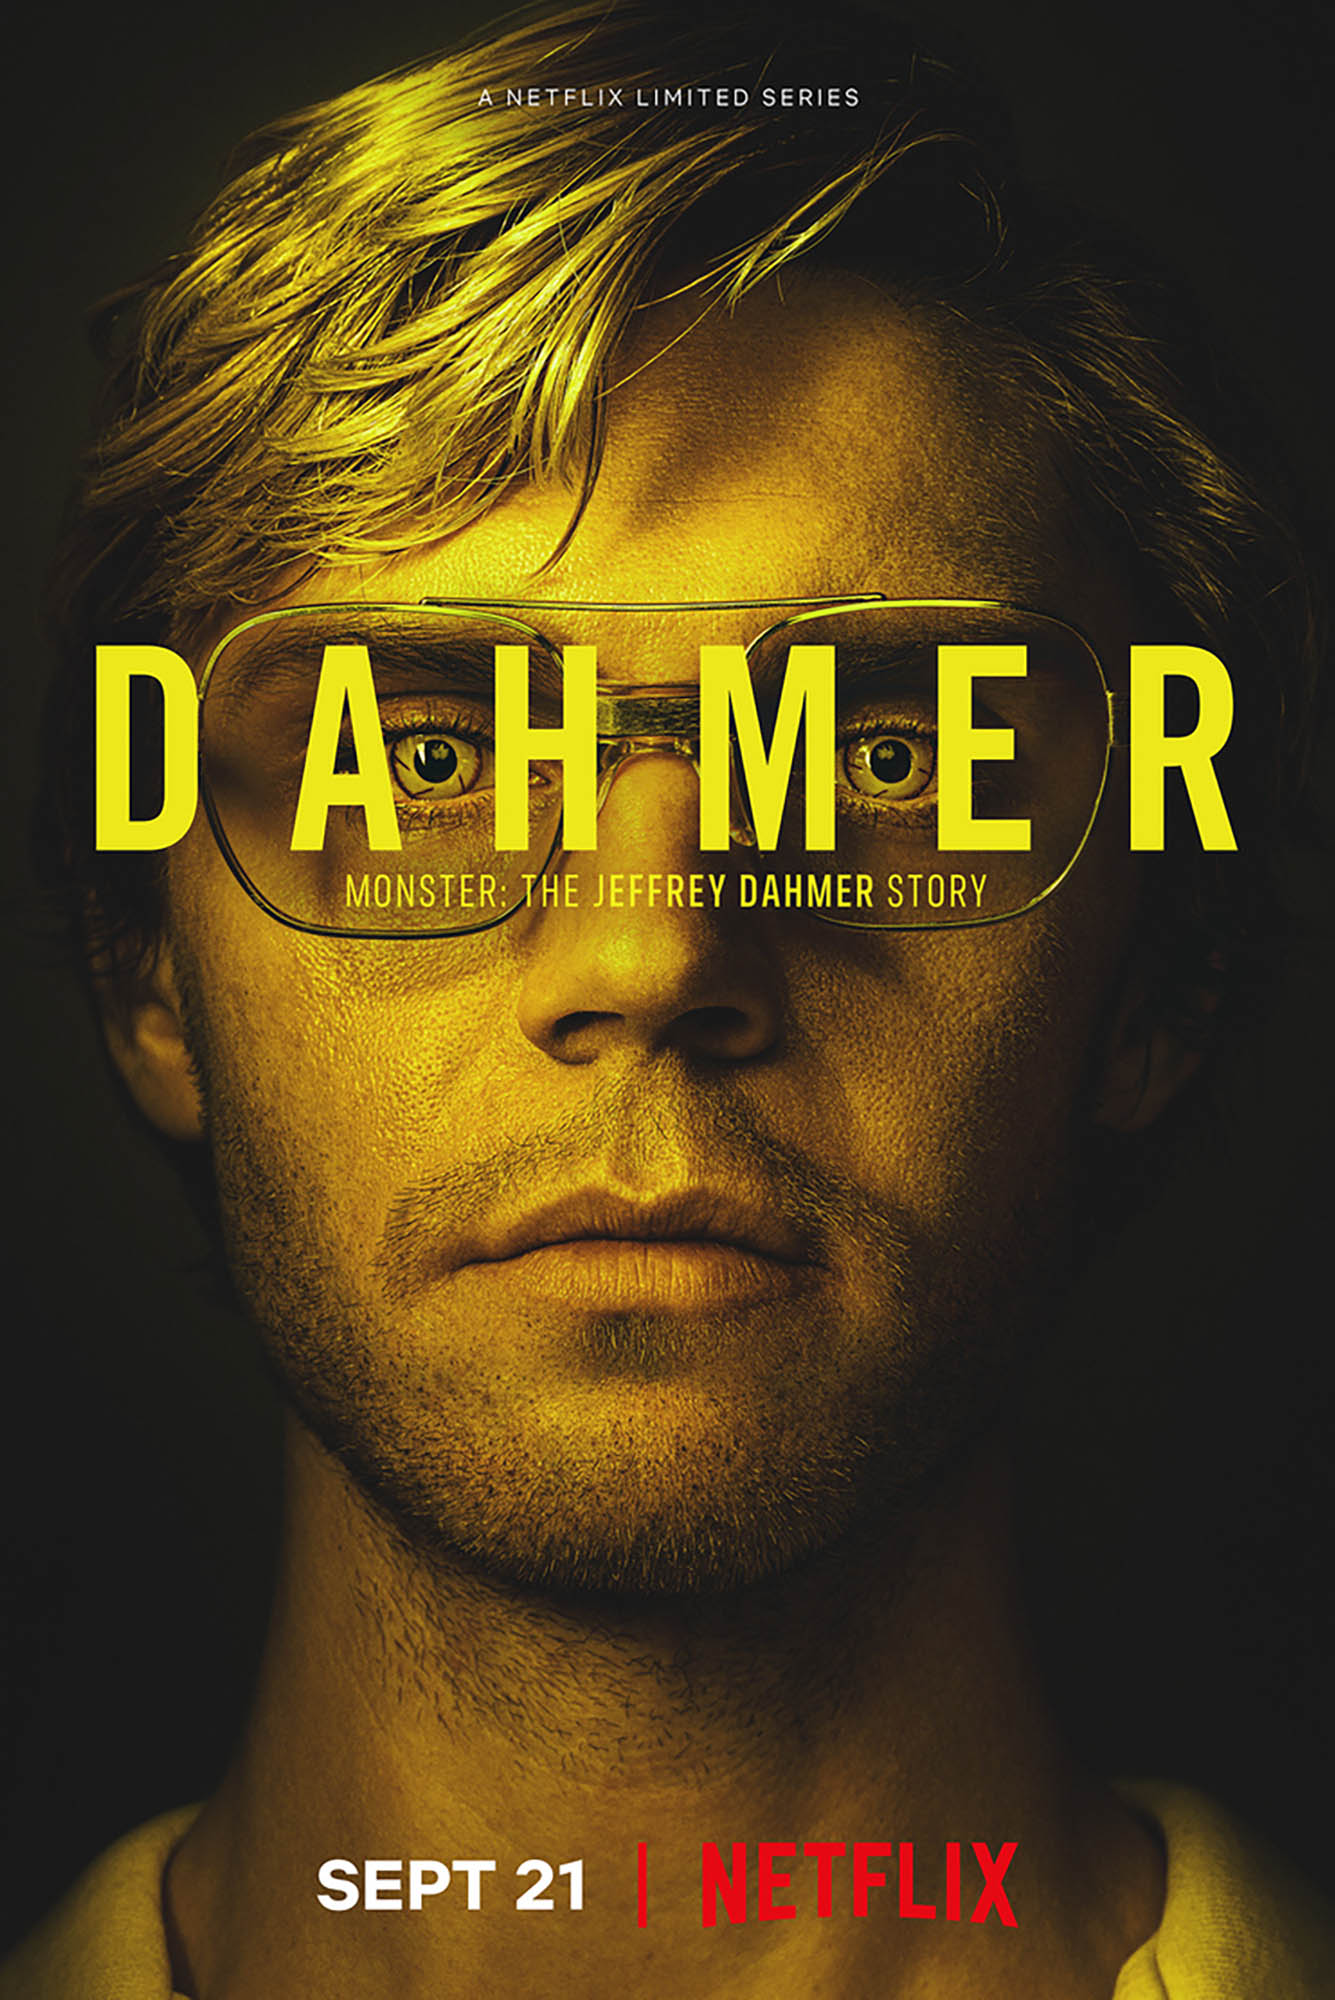 Photo: Promotional movie poster for the DAHMER series on Netflix. A headshot of the actor that plays Dahmer is behind yellow text overlay that reads DAHMER.